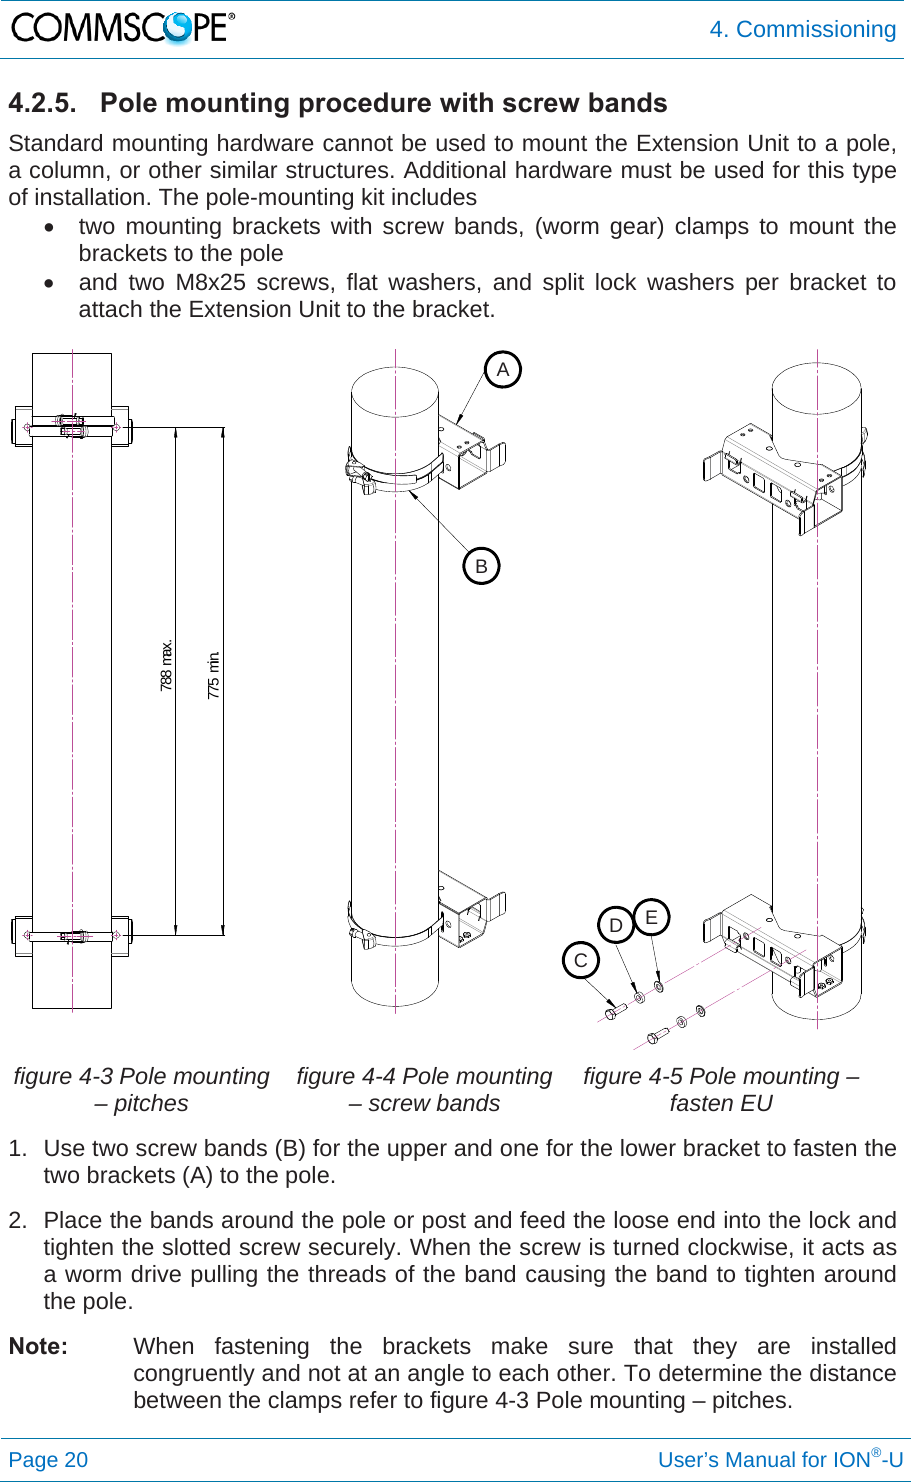  4. Commissioning Page 20     User’s Manual for ION®-U 4.2.5.  Pole mounting procedure with screw bands Standard mounting hardware cannot be used to mount the Extension Unit to a pole, a column, or other similar structures. Additional hardware must be used for this type of installation. The pole-mounting kit includes   two mounting brackets with screw bands, (worm gear) clamps to mount the brackets to the pole   and two M8x25 screws, flat washers, and split lock washers per bracket to attach the Extension Unit to the bracket.    figure 4-3 Pole mounting – pitches  figure 4-4 Pole mounting – screw bands  figure 4-5 Pole mounting – fasten EU  1.  Use two screw bands (B) for the upper and one for the lower bracket to fasten the two brackets (A) to the pole.  2.  Place the bands around the pole or post and feed the loose end into the lock and tighten the slotted screw securely. When the screw is turned clockwise, it acts as a worm drive pulling the threads of the band causing the band to tighten around the pole.  Note:  When fastening the brackets make sure that they are installed congruently and not at an angle to each other. To determine the distance between the clamps refer to figure 4-3 Pole mounting – pitches. 775 min.788 max.ABCDE